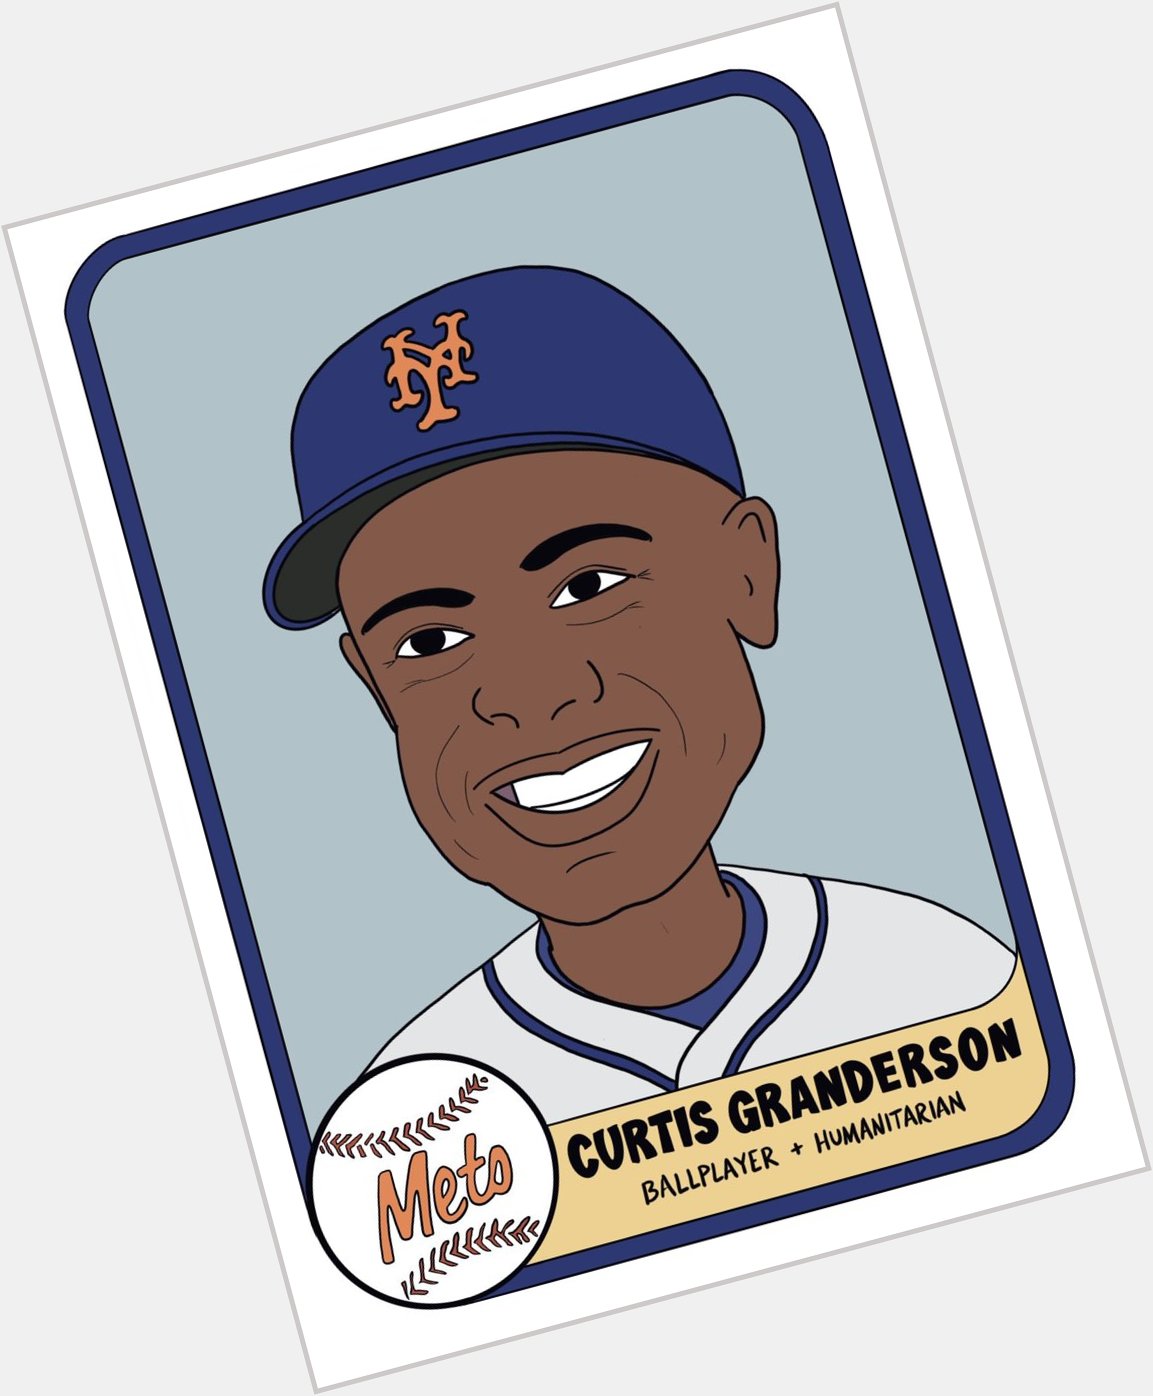 Happy Birthday Curtis Granderson, one of the best! 